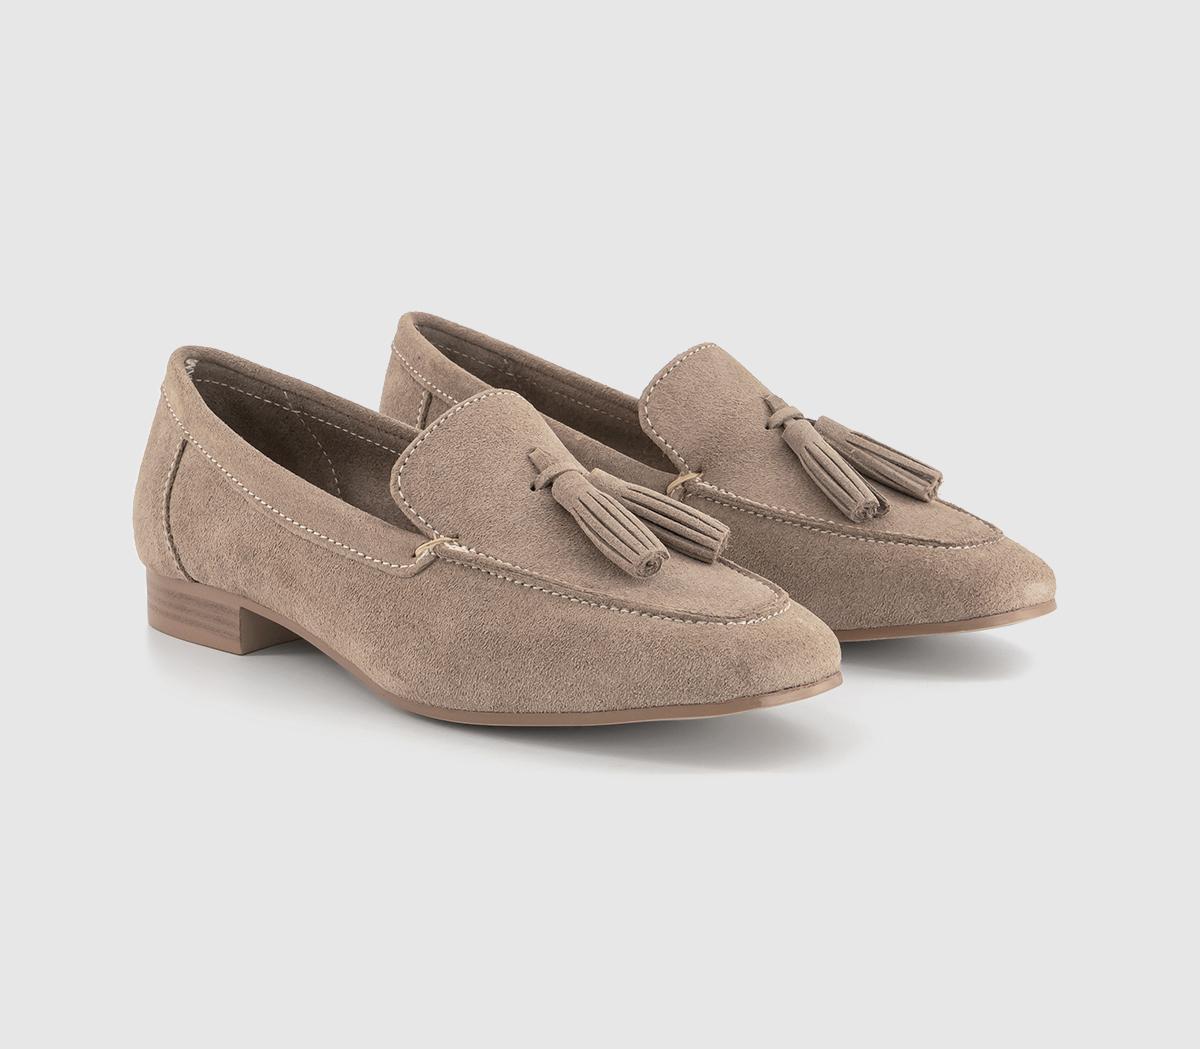 OFFICE Womens Fond Tassel Loafers Taupe Suede, 3